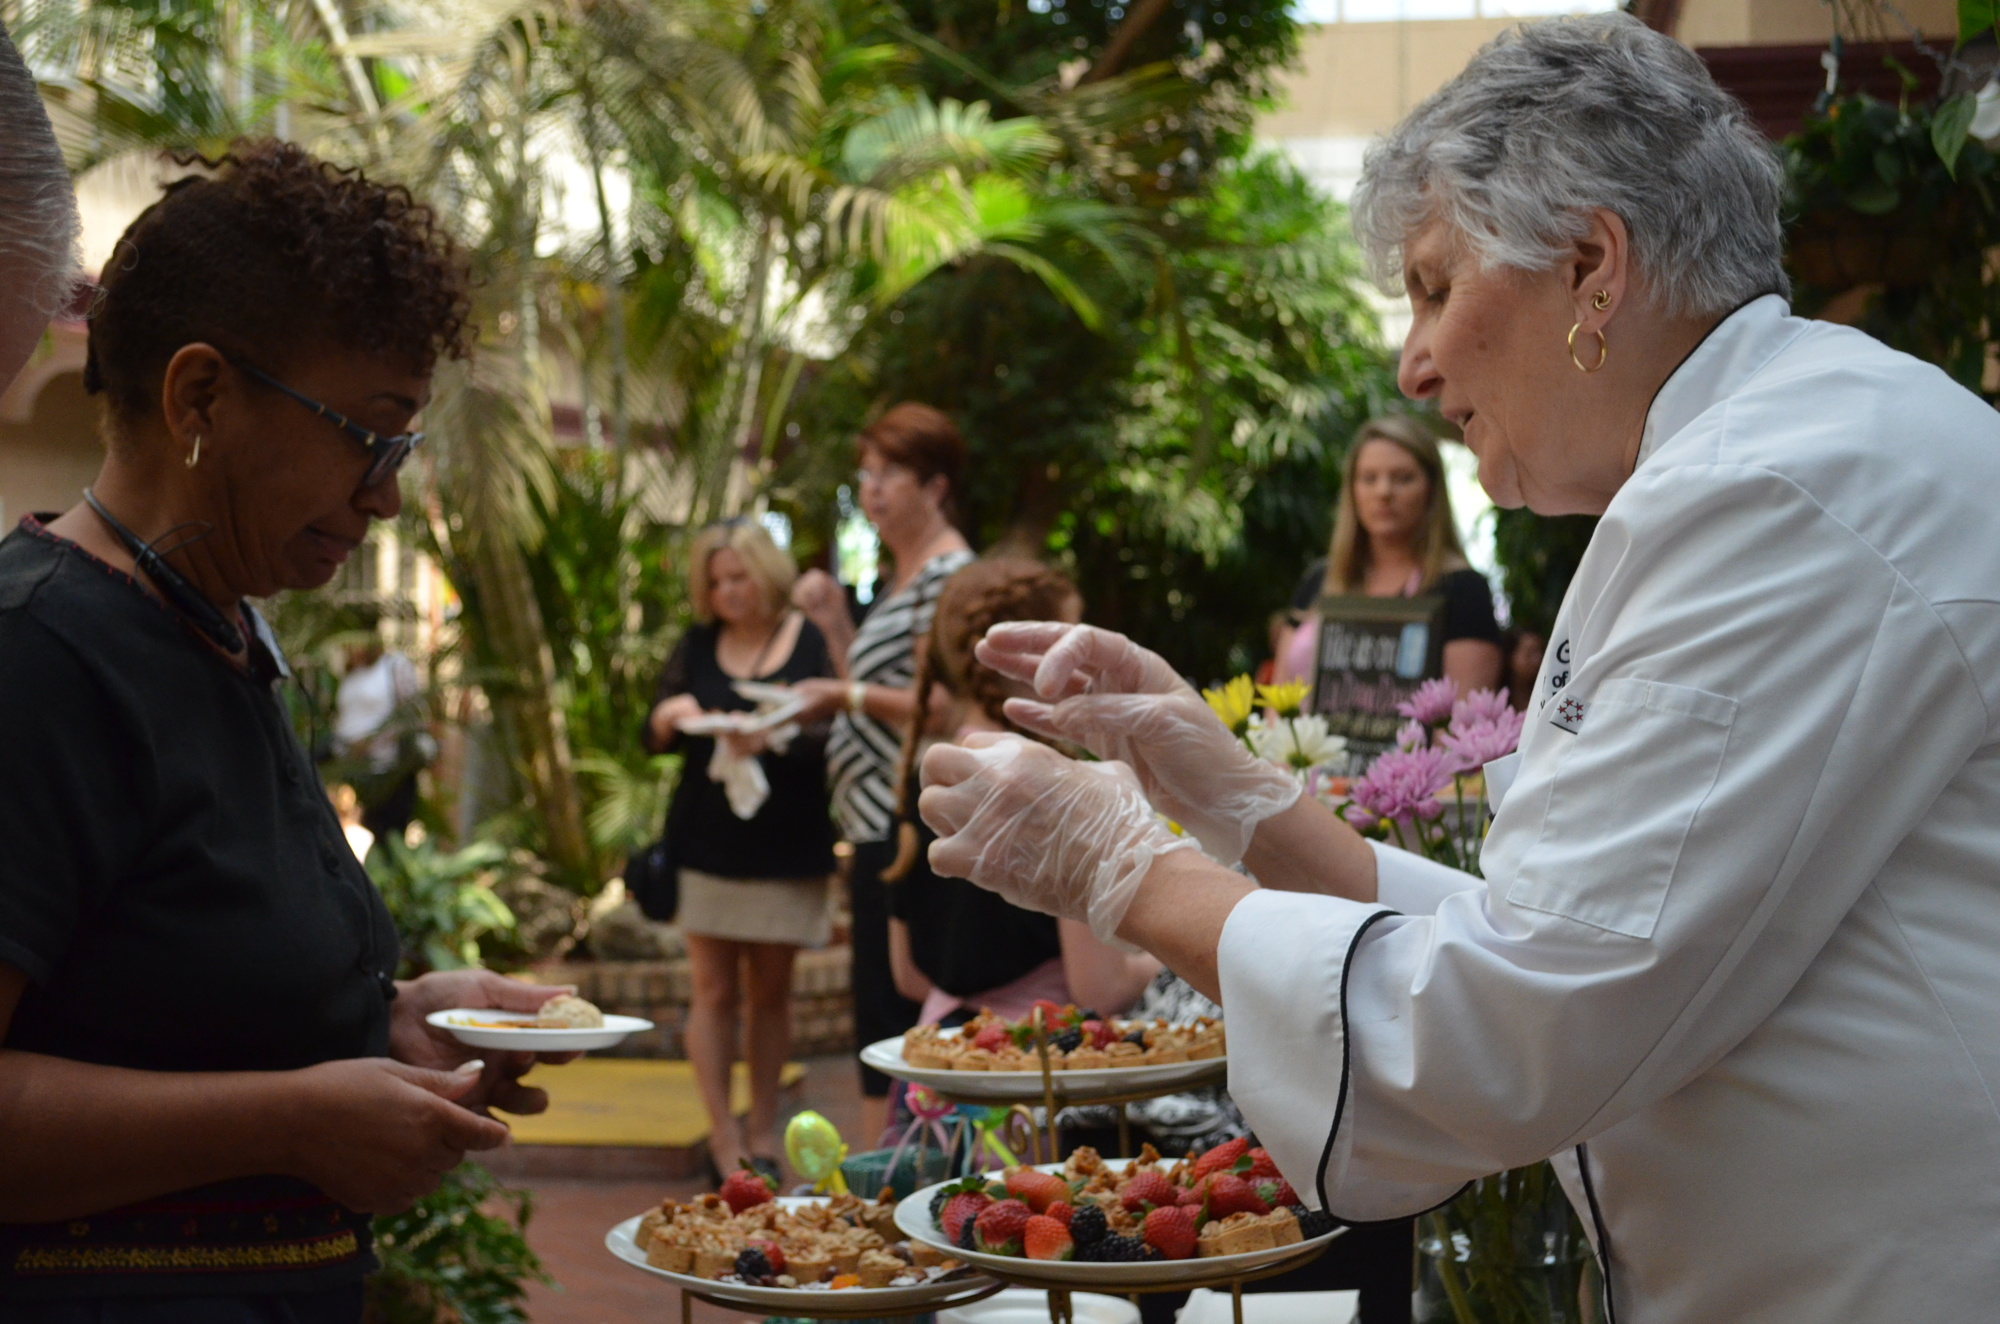 Anna Castellina discusses the sweet and savory spread from the University of South Florida Culinary Innovation Lab during the UCP Chocolate Sundae & Food Festival.